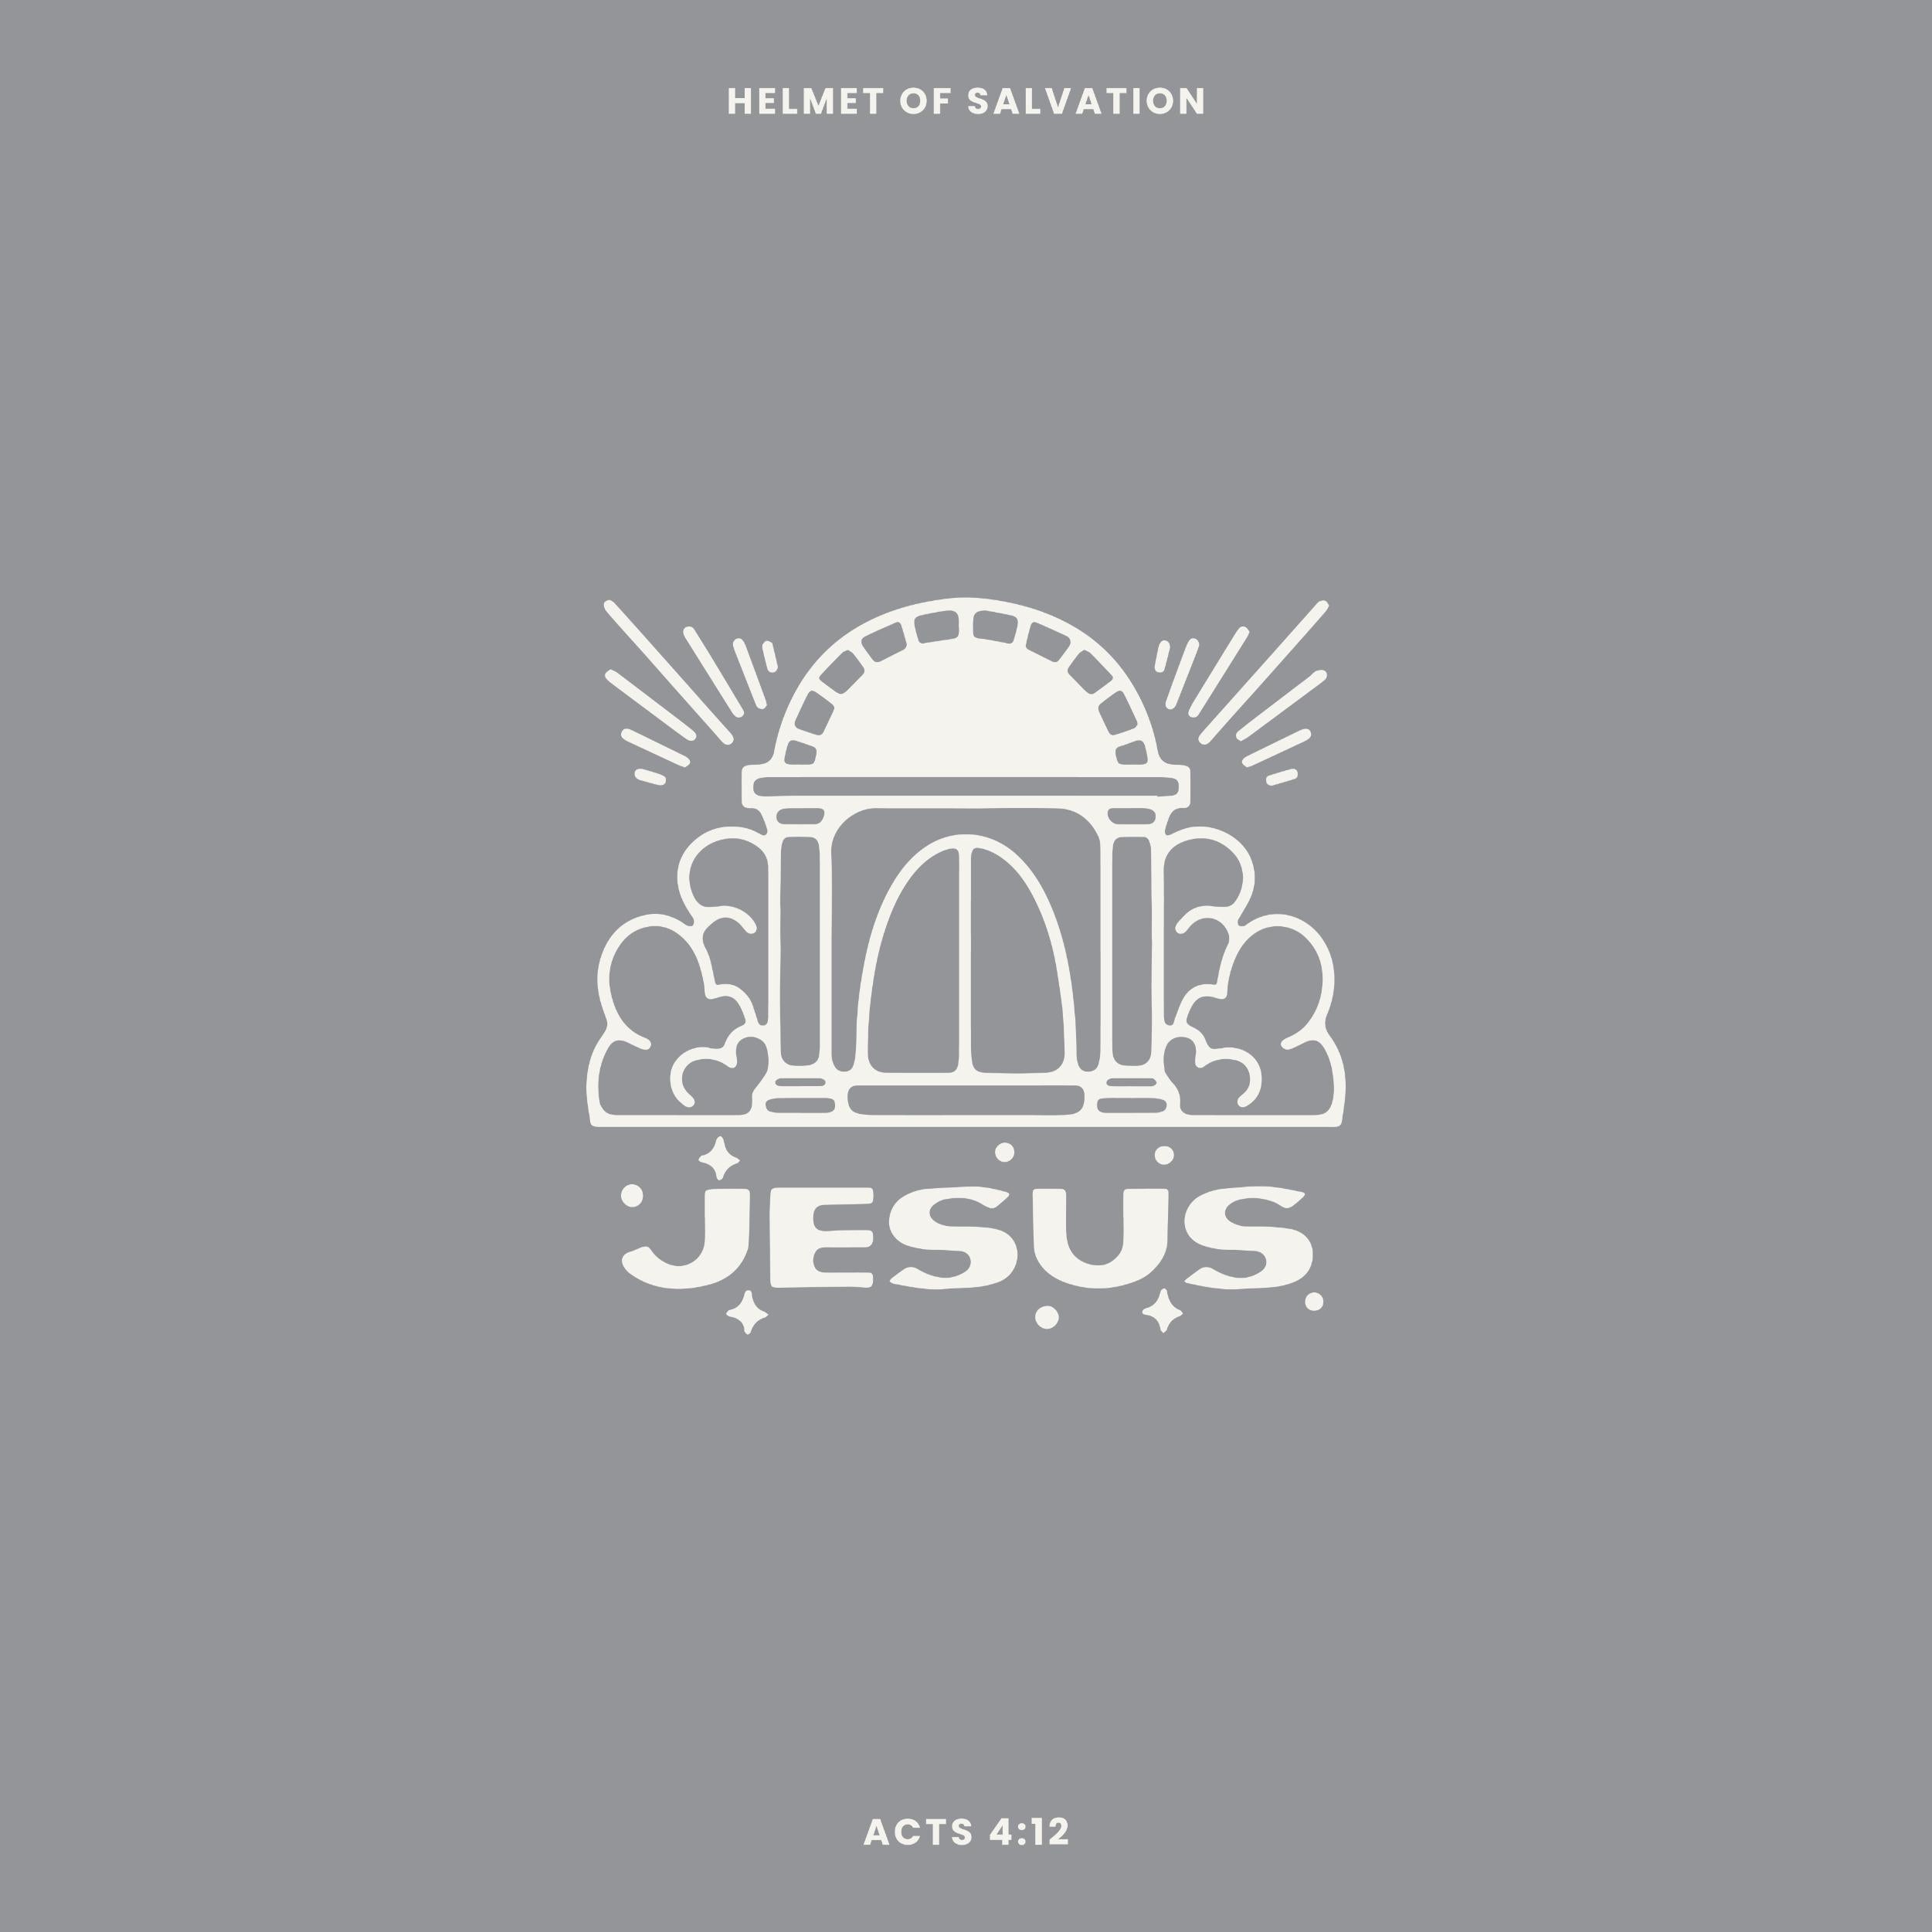 Acts 4:12 "The Only Name" (Helmet of Salvation - Week 4)